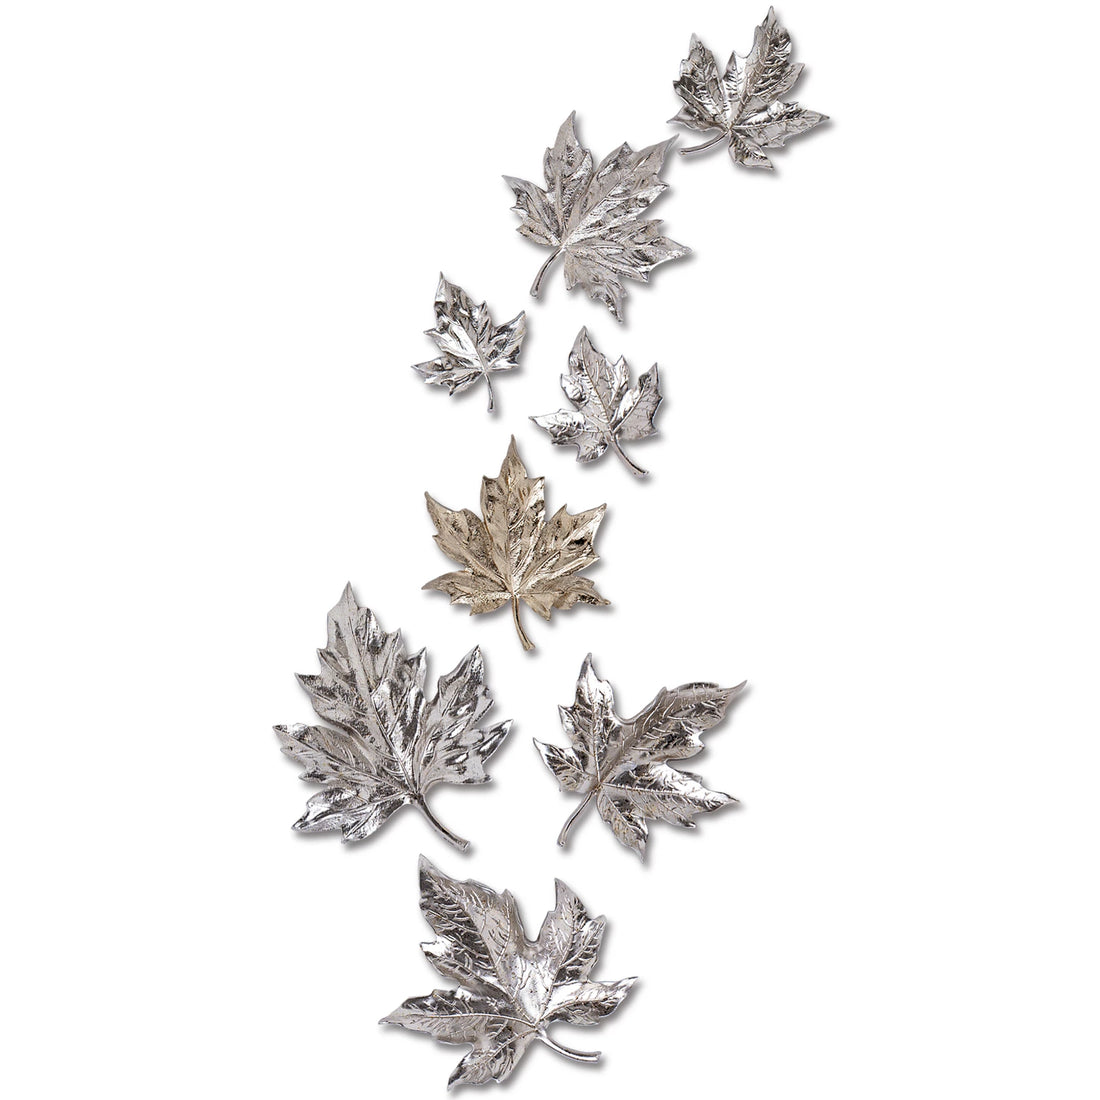 8 Pack Maple Leaf Wall Resin Art Cute 3D Wall Sculptures Ornaments Suitable for Living Room Bedroom Cafe Bar Hotel